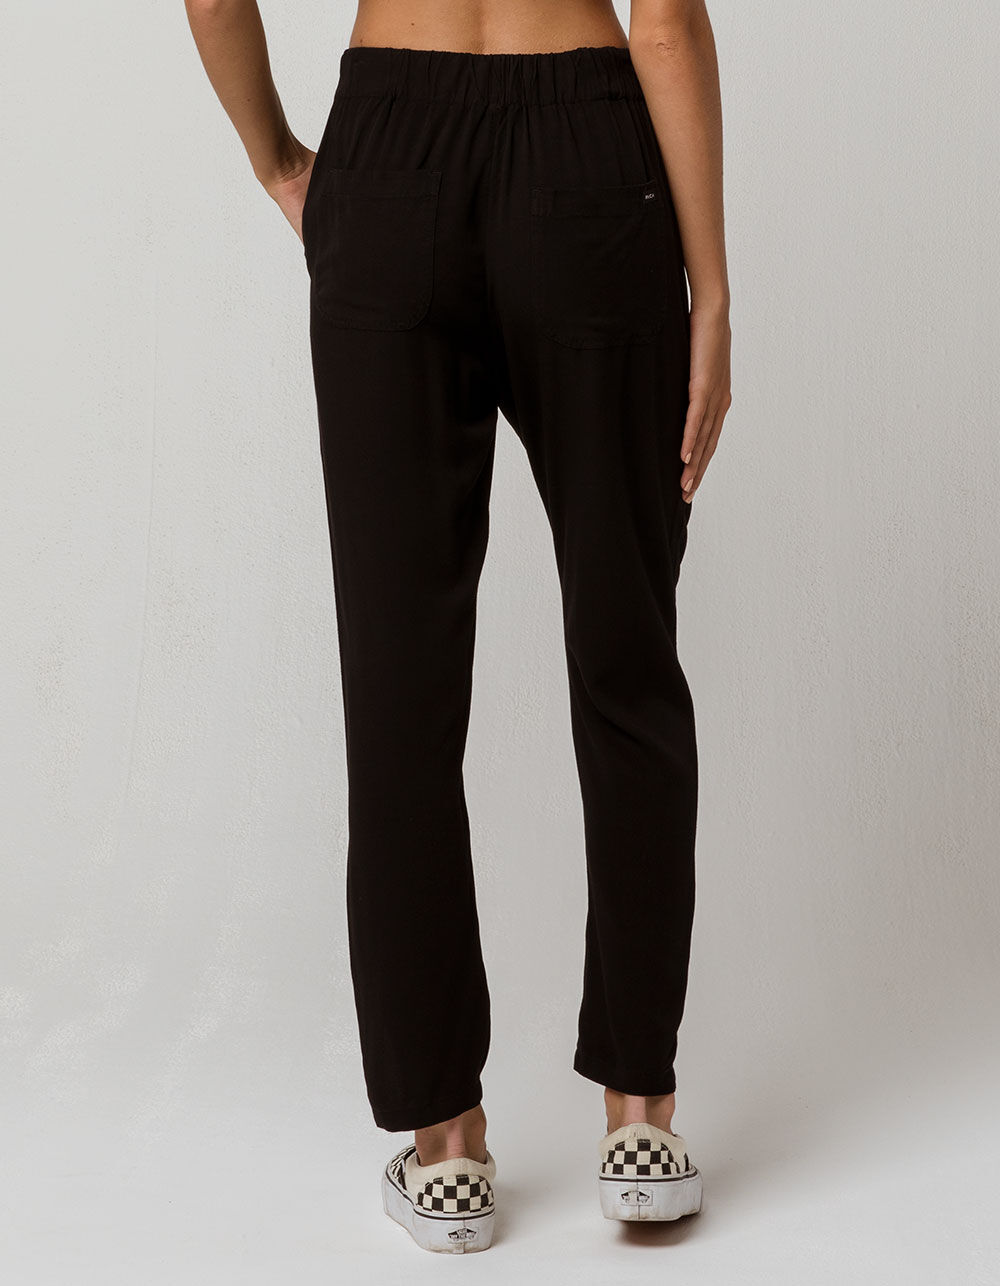 RVCA Chill Vibes Womens Elastic Pants image number 2